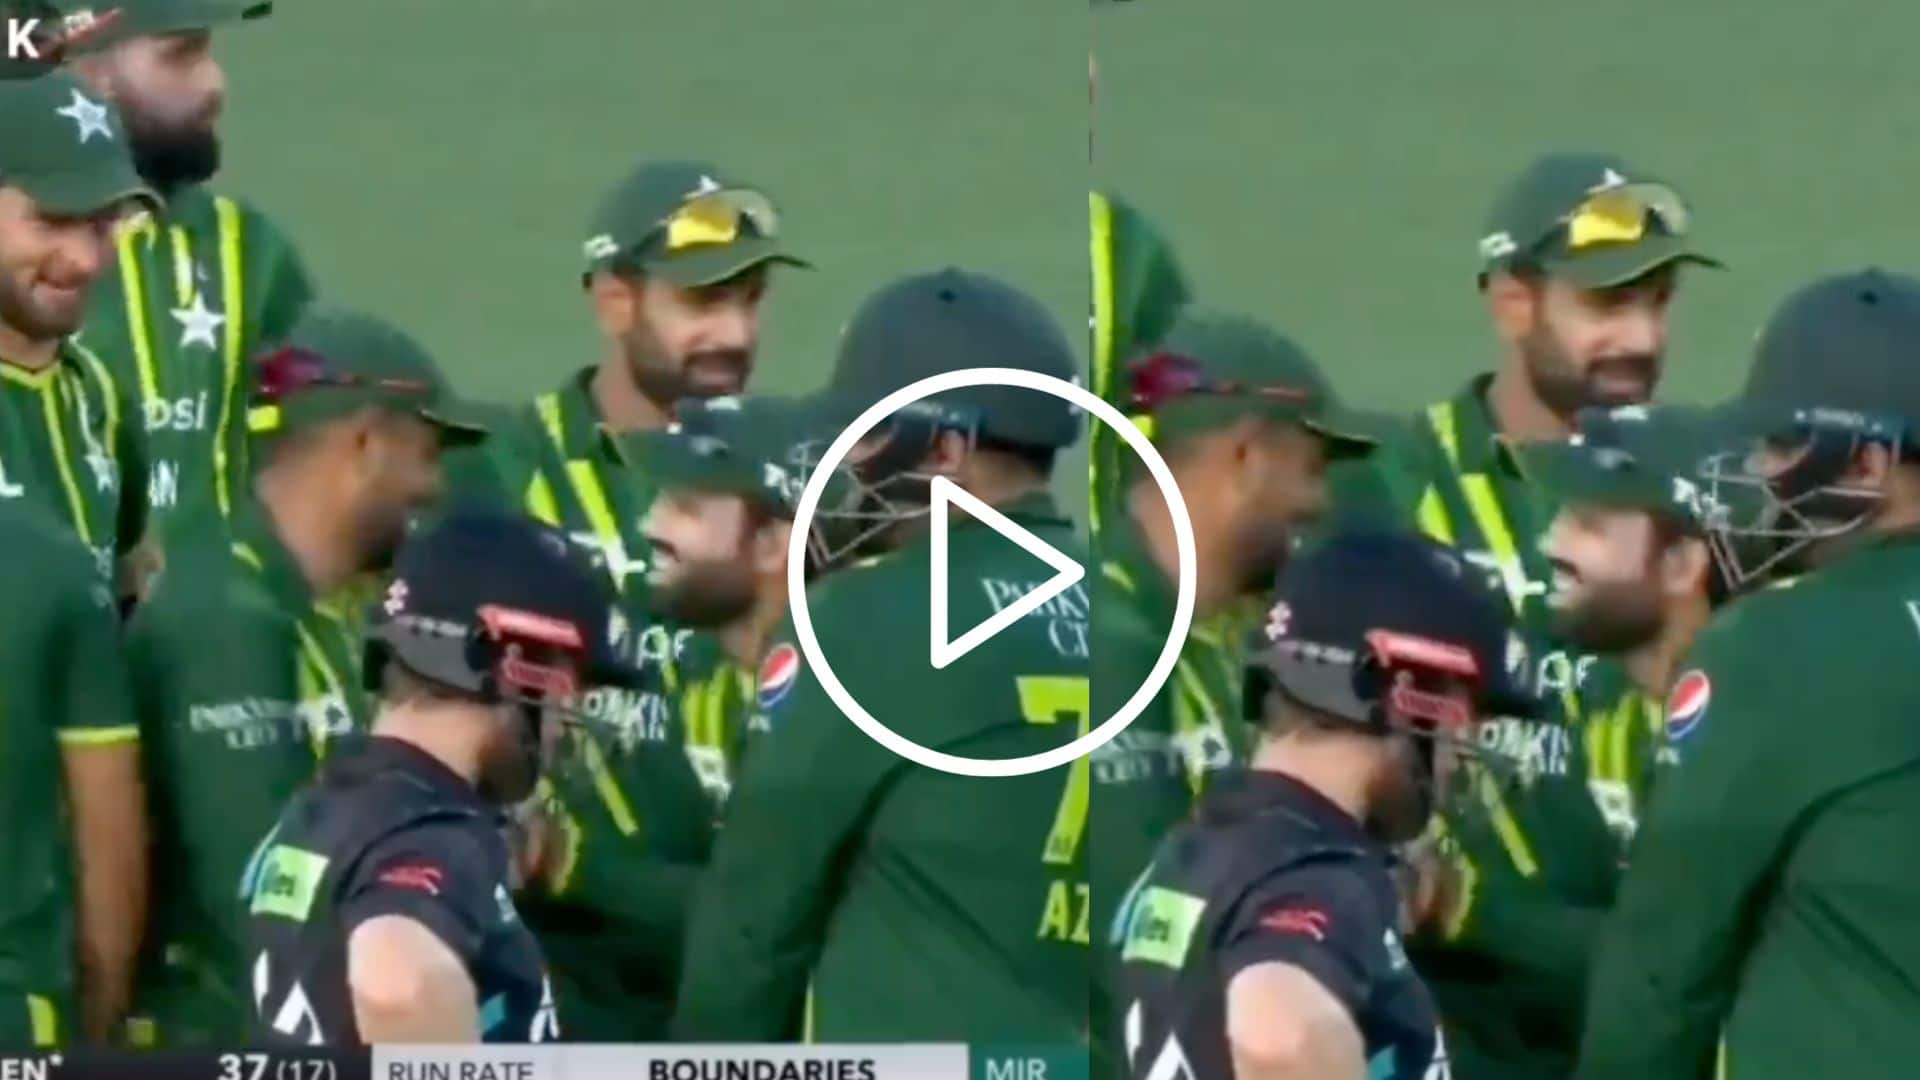 [Watch] Babar Azam and Mohd. Rizwan's Cute On-Field Banter Gets Caught On Cam